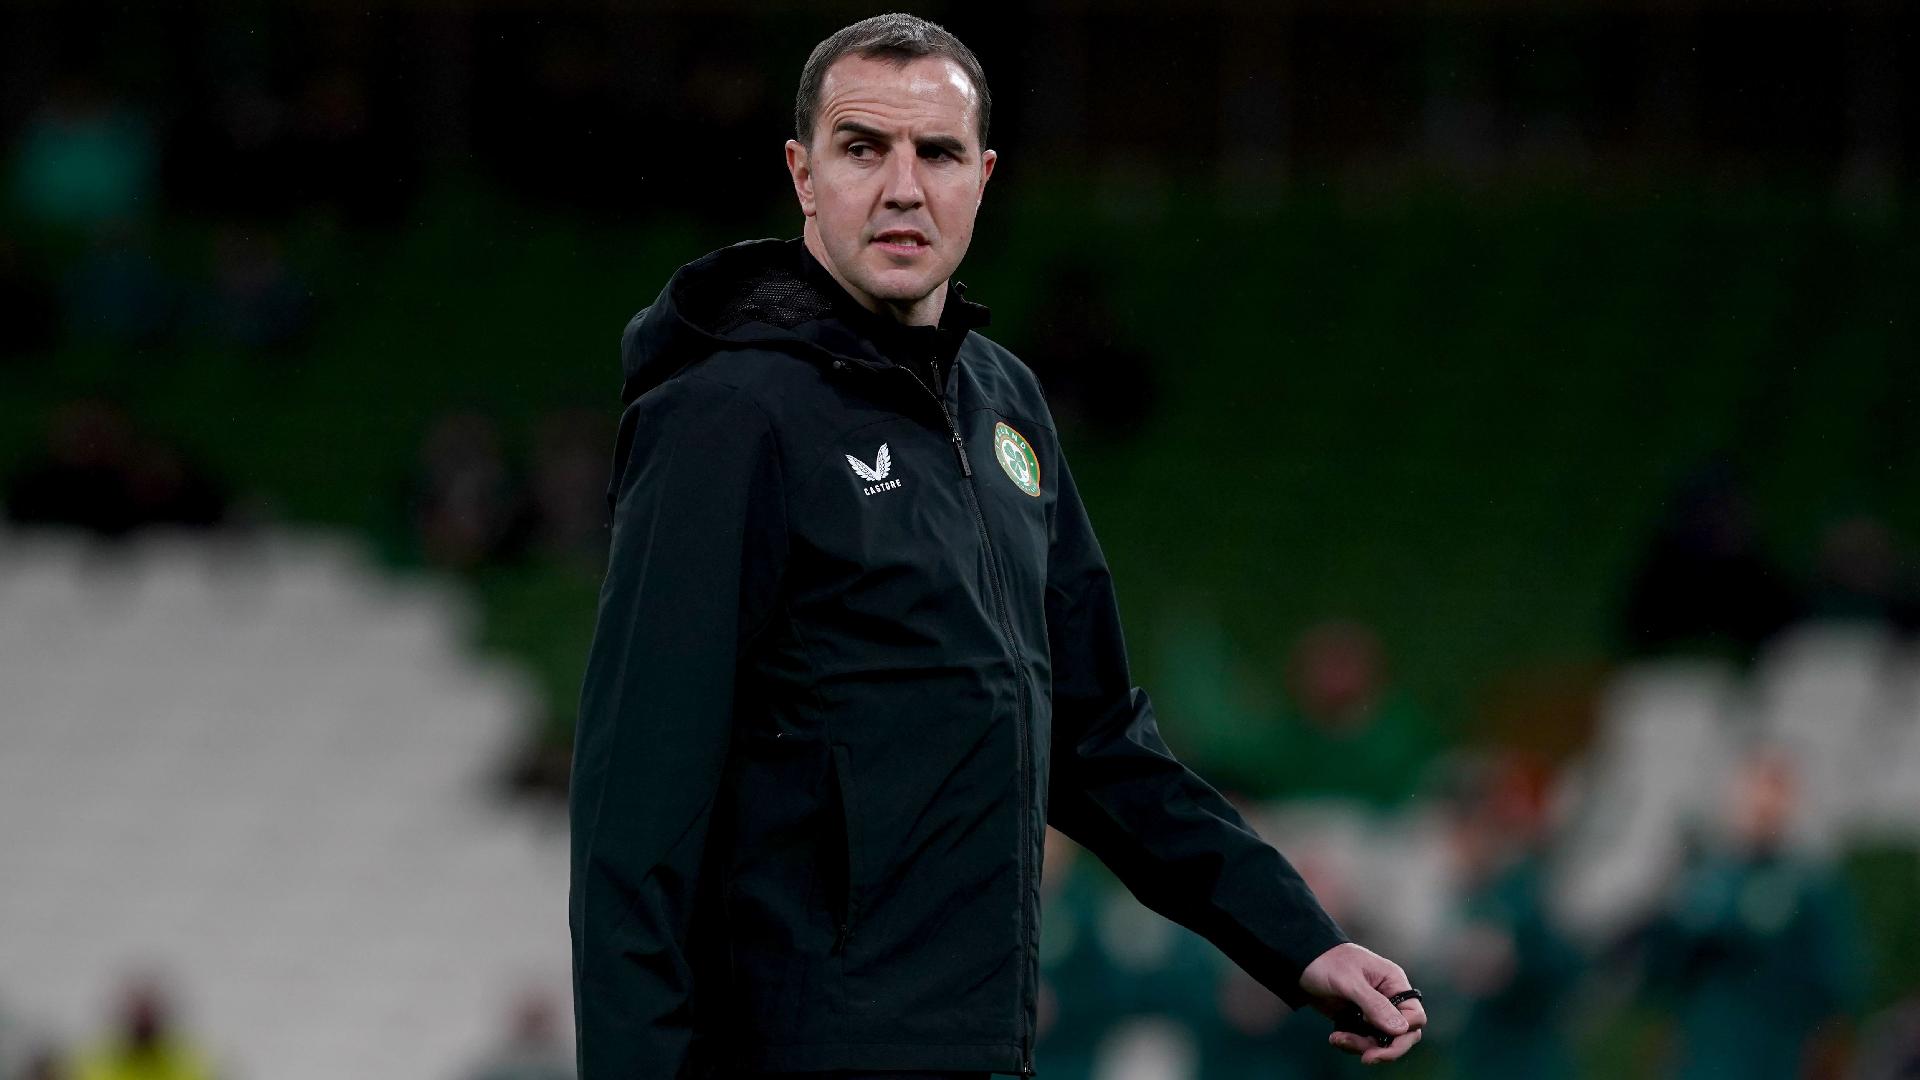 John O’Shea takes interim charge of Republic of Ireland for March double-header